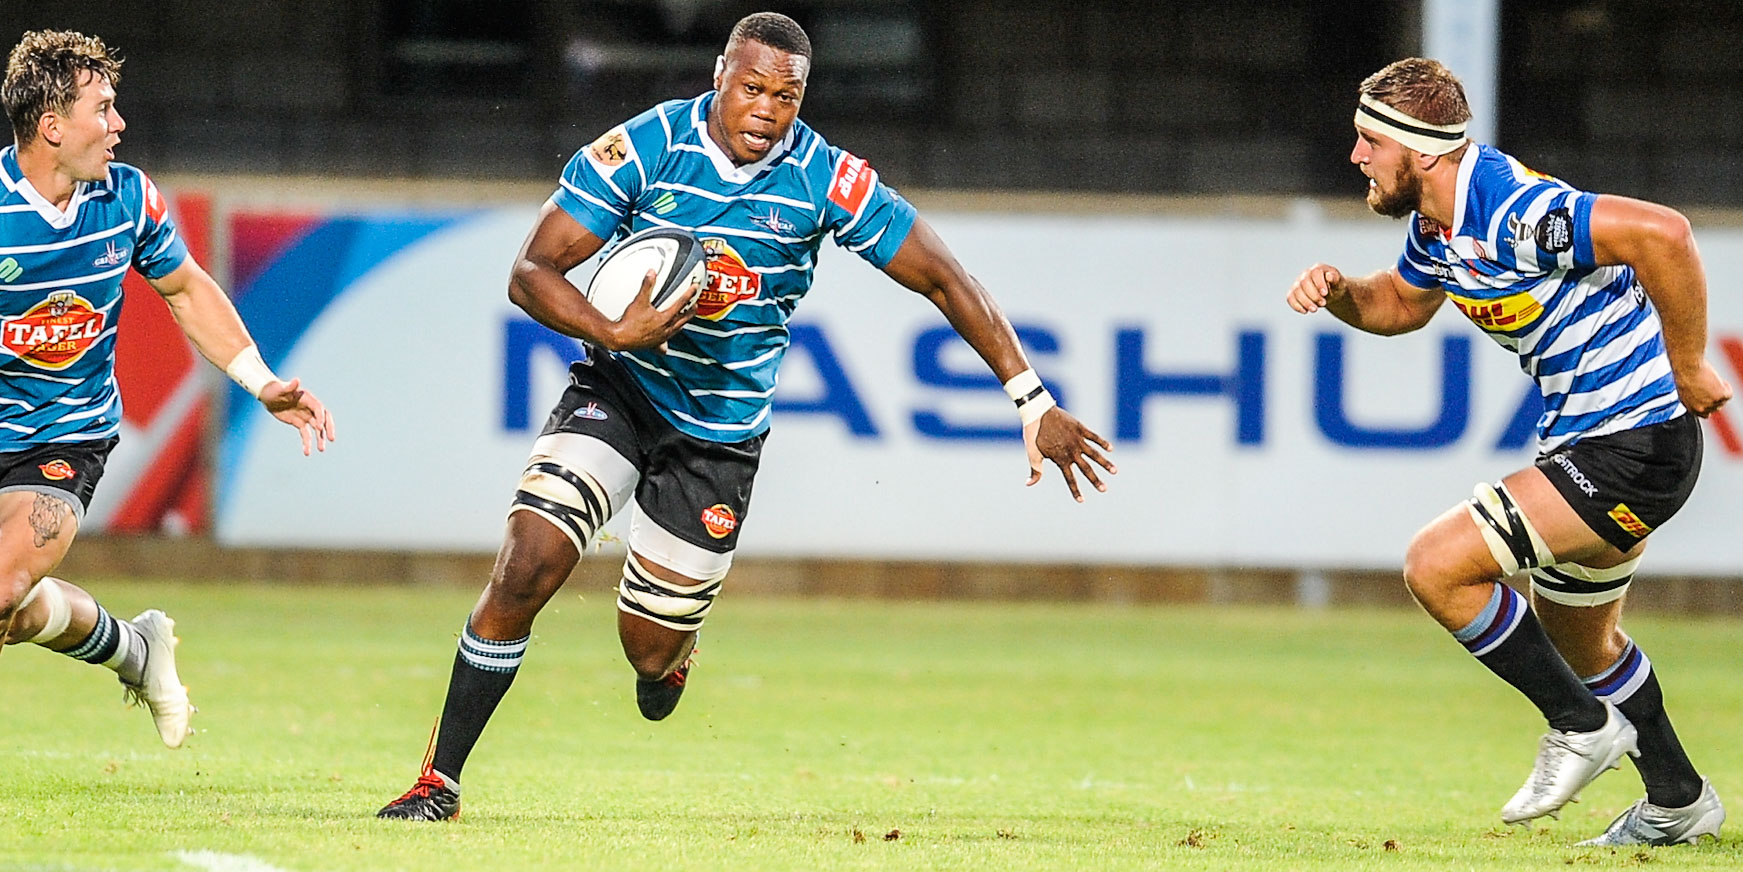 Sibabalo Qoma of Tafel Lager Griquas goes on the attack against DHL WP.